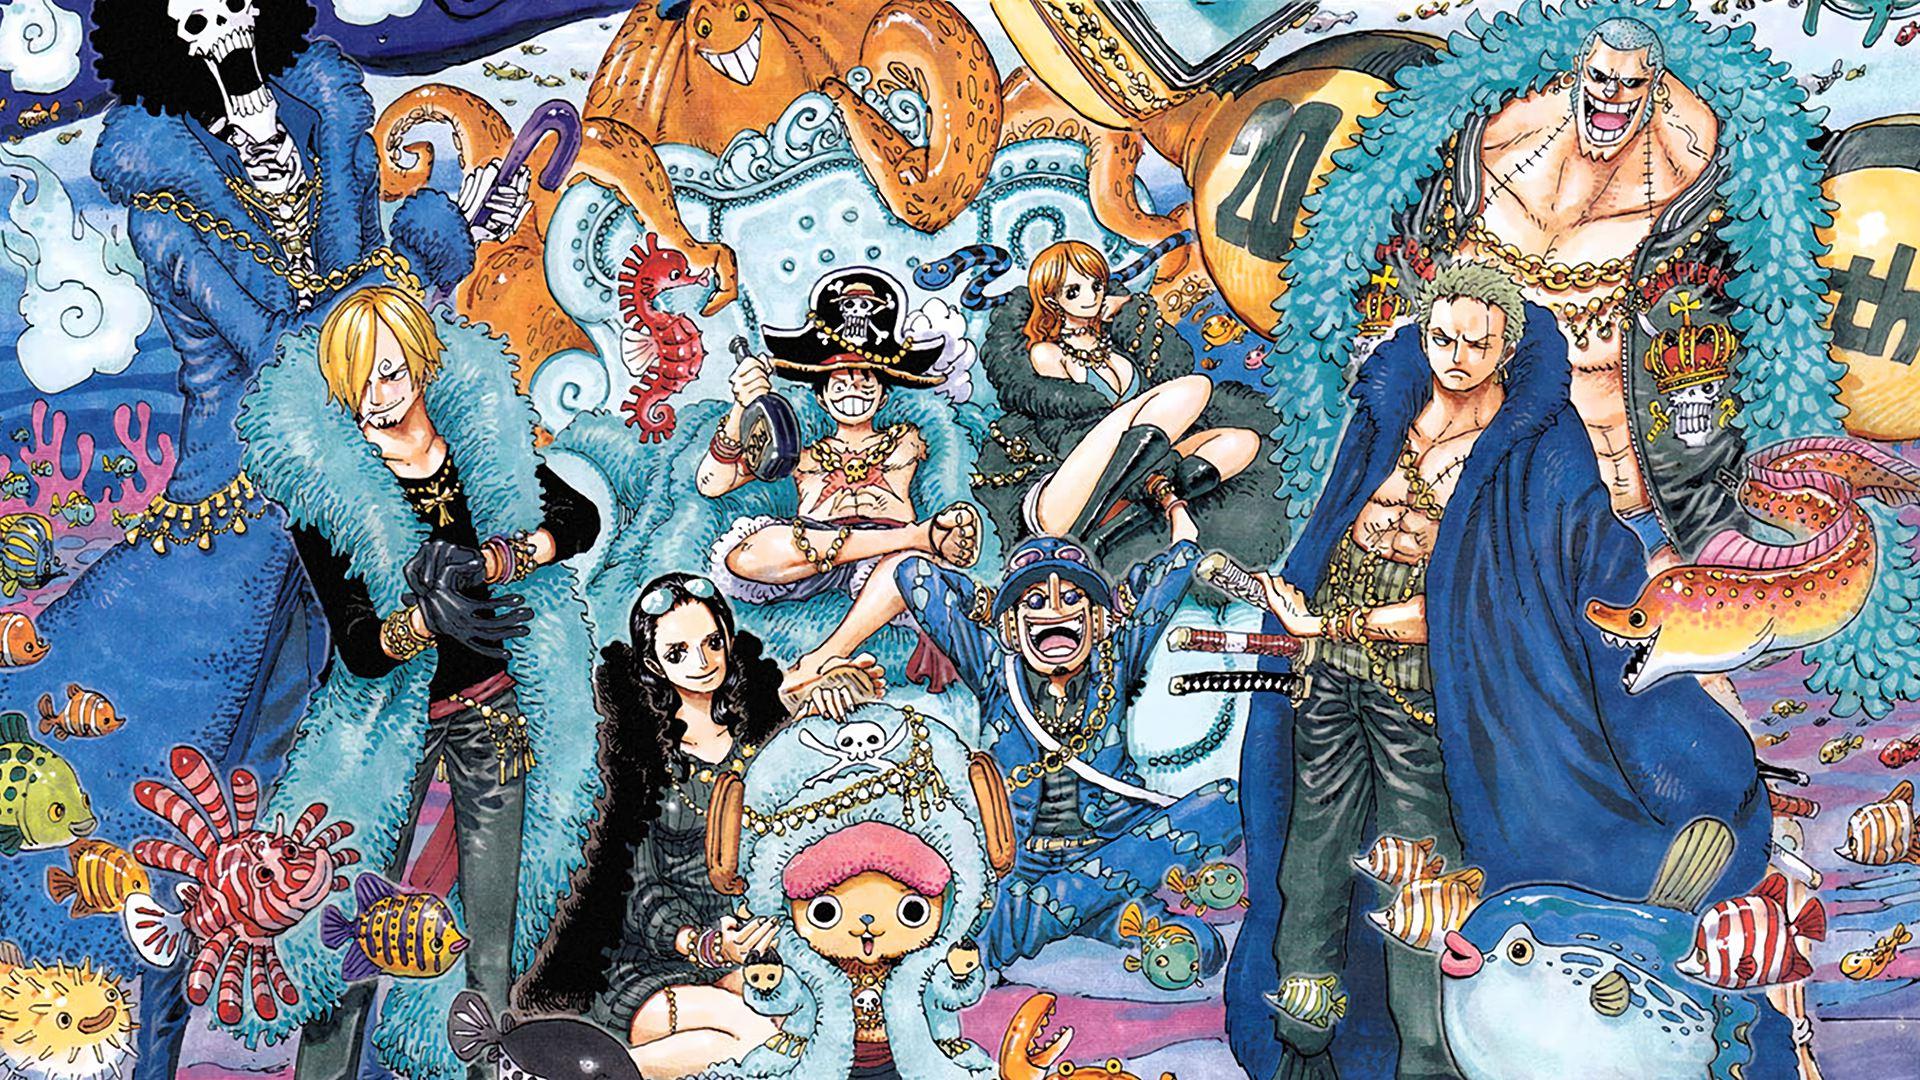 httpspbstwimgcommediaEhgqElqUMAESXkTformatjpgnamelarge  One  piece wallpaper iphone One piece cartoon One piece pictures